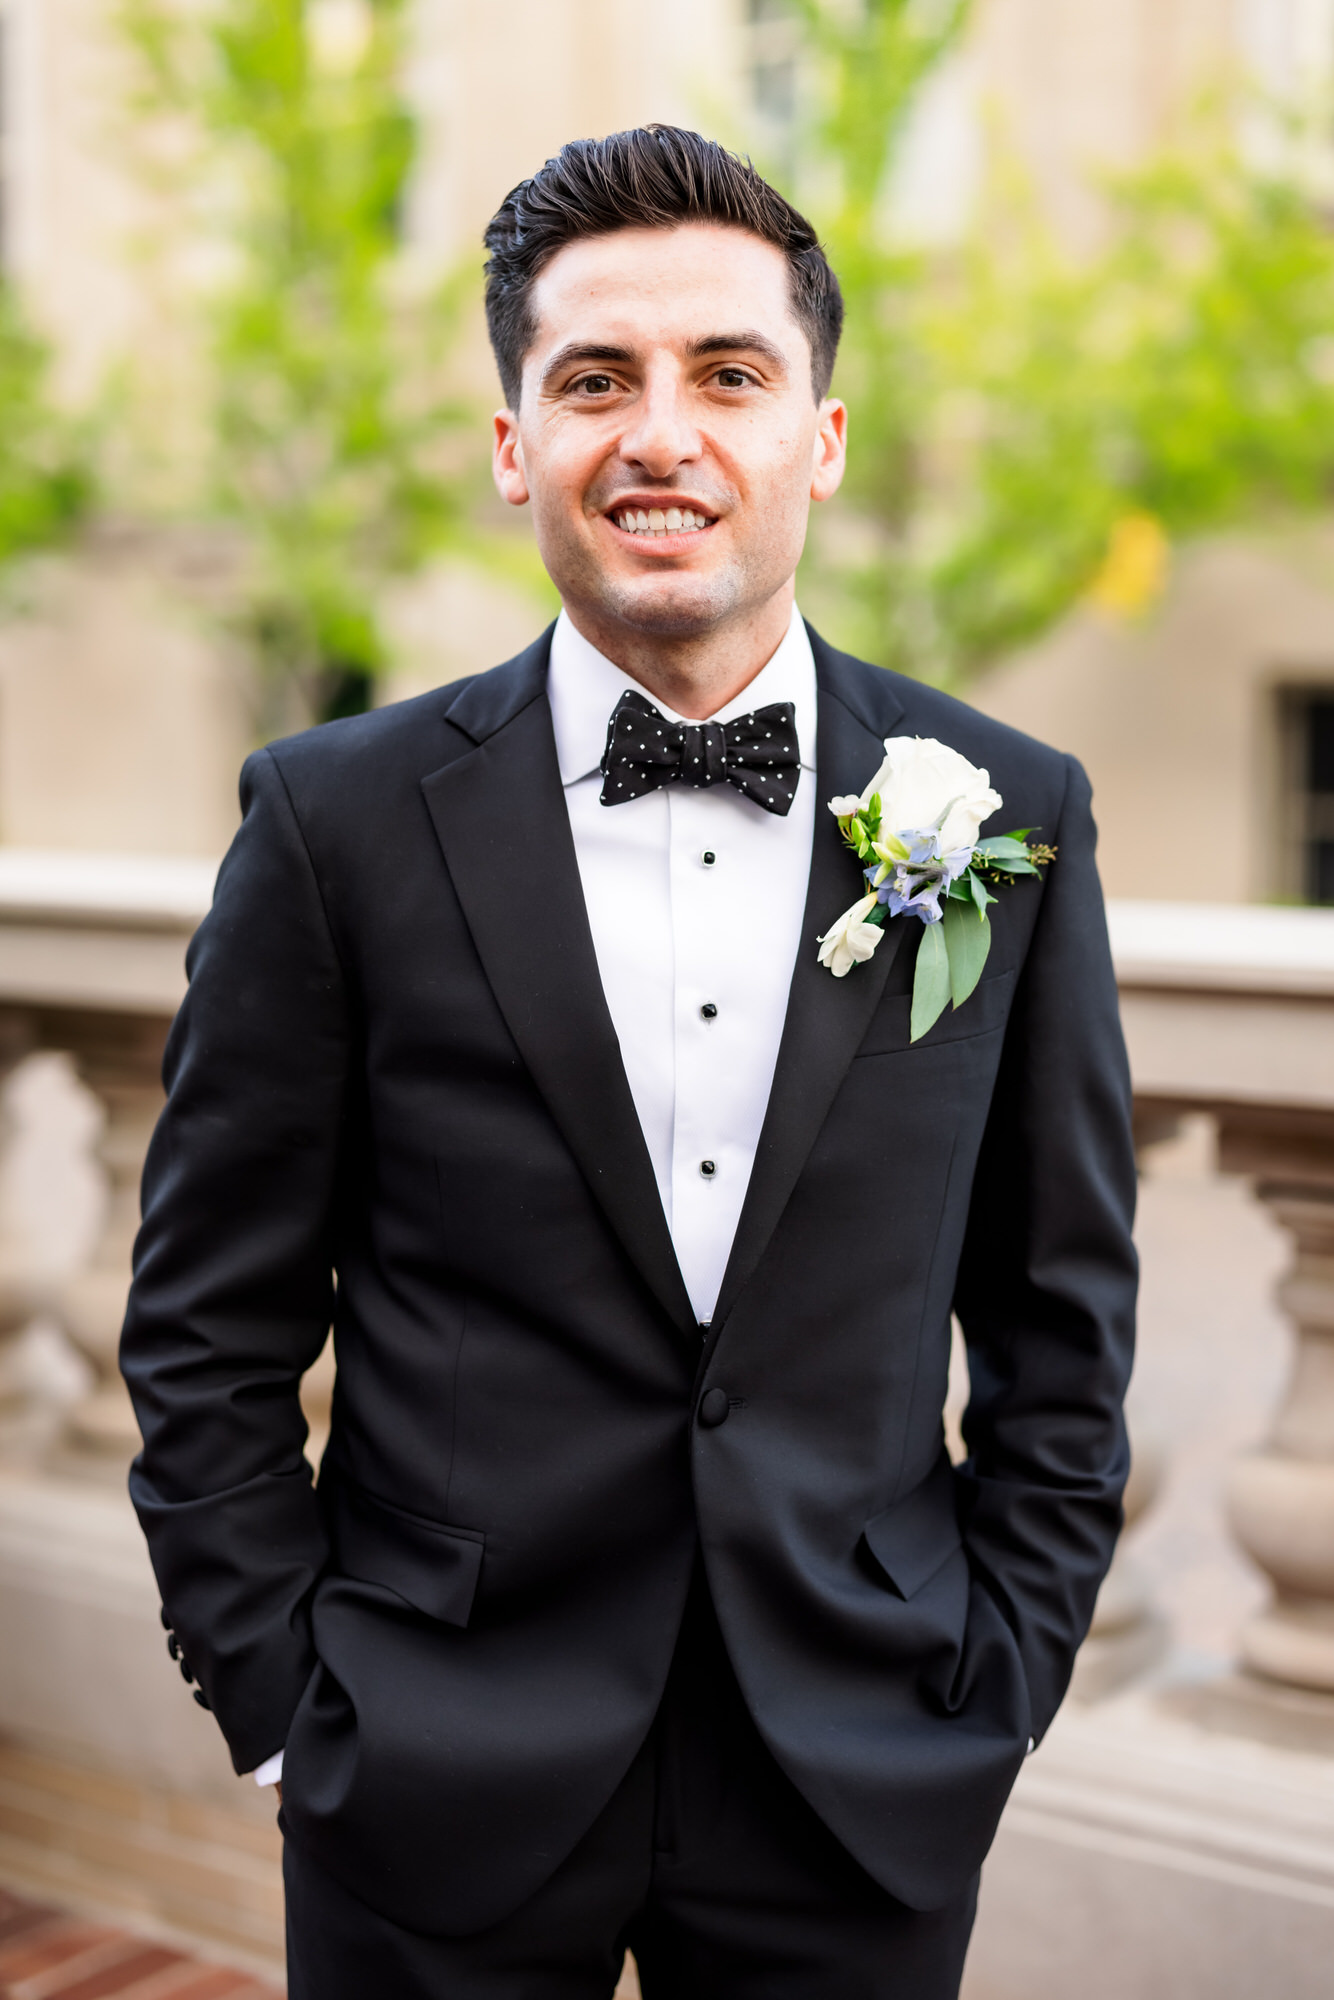 groom wearing tuxedo with hands in pockets smiling